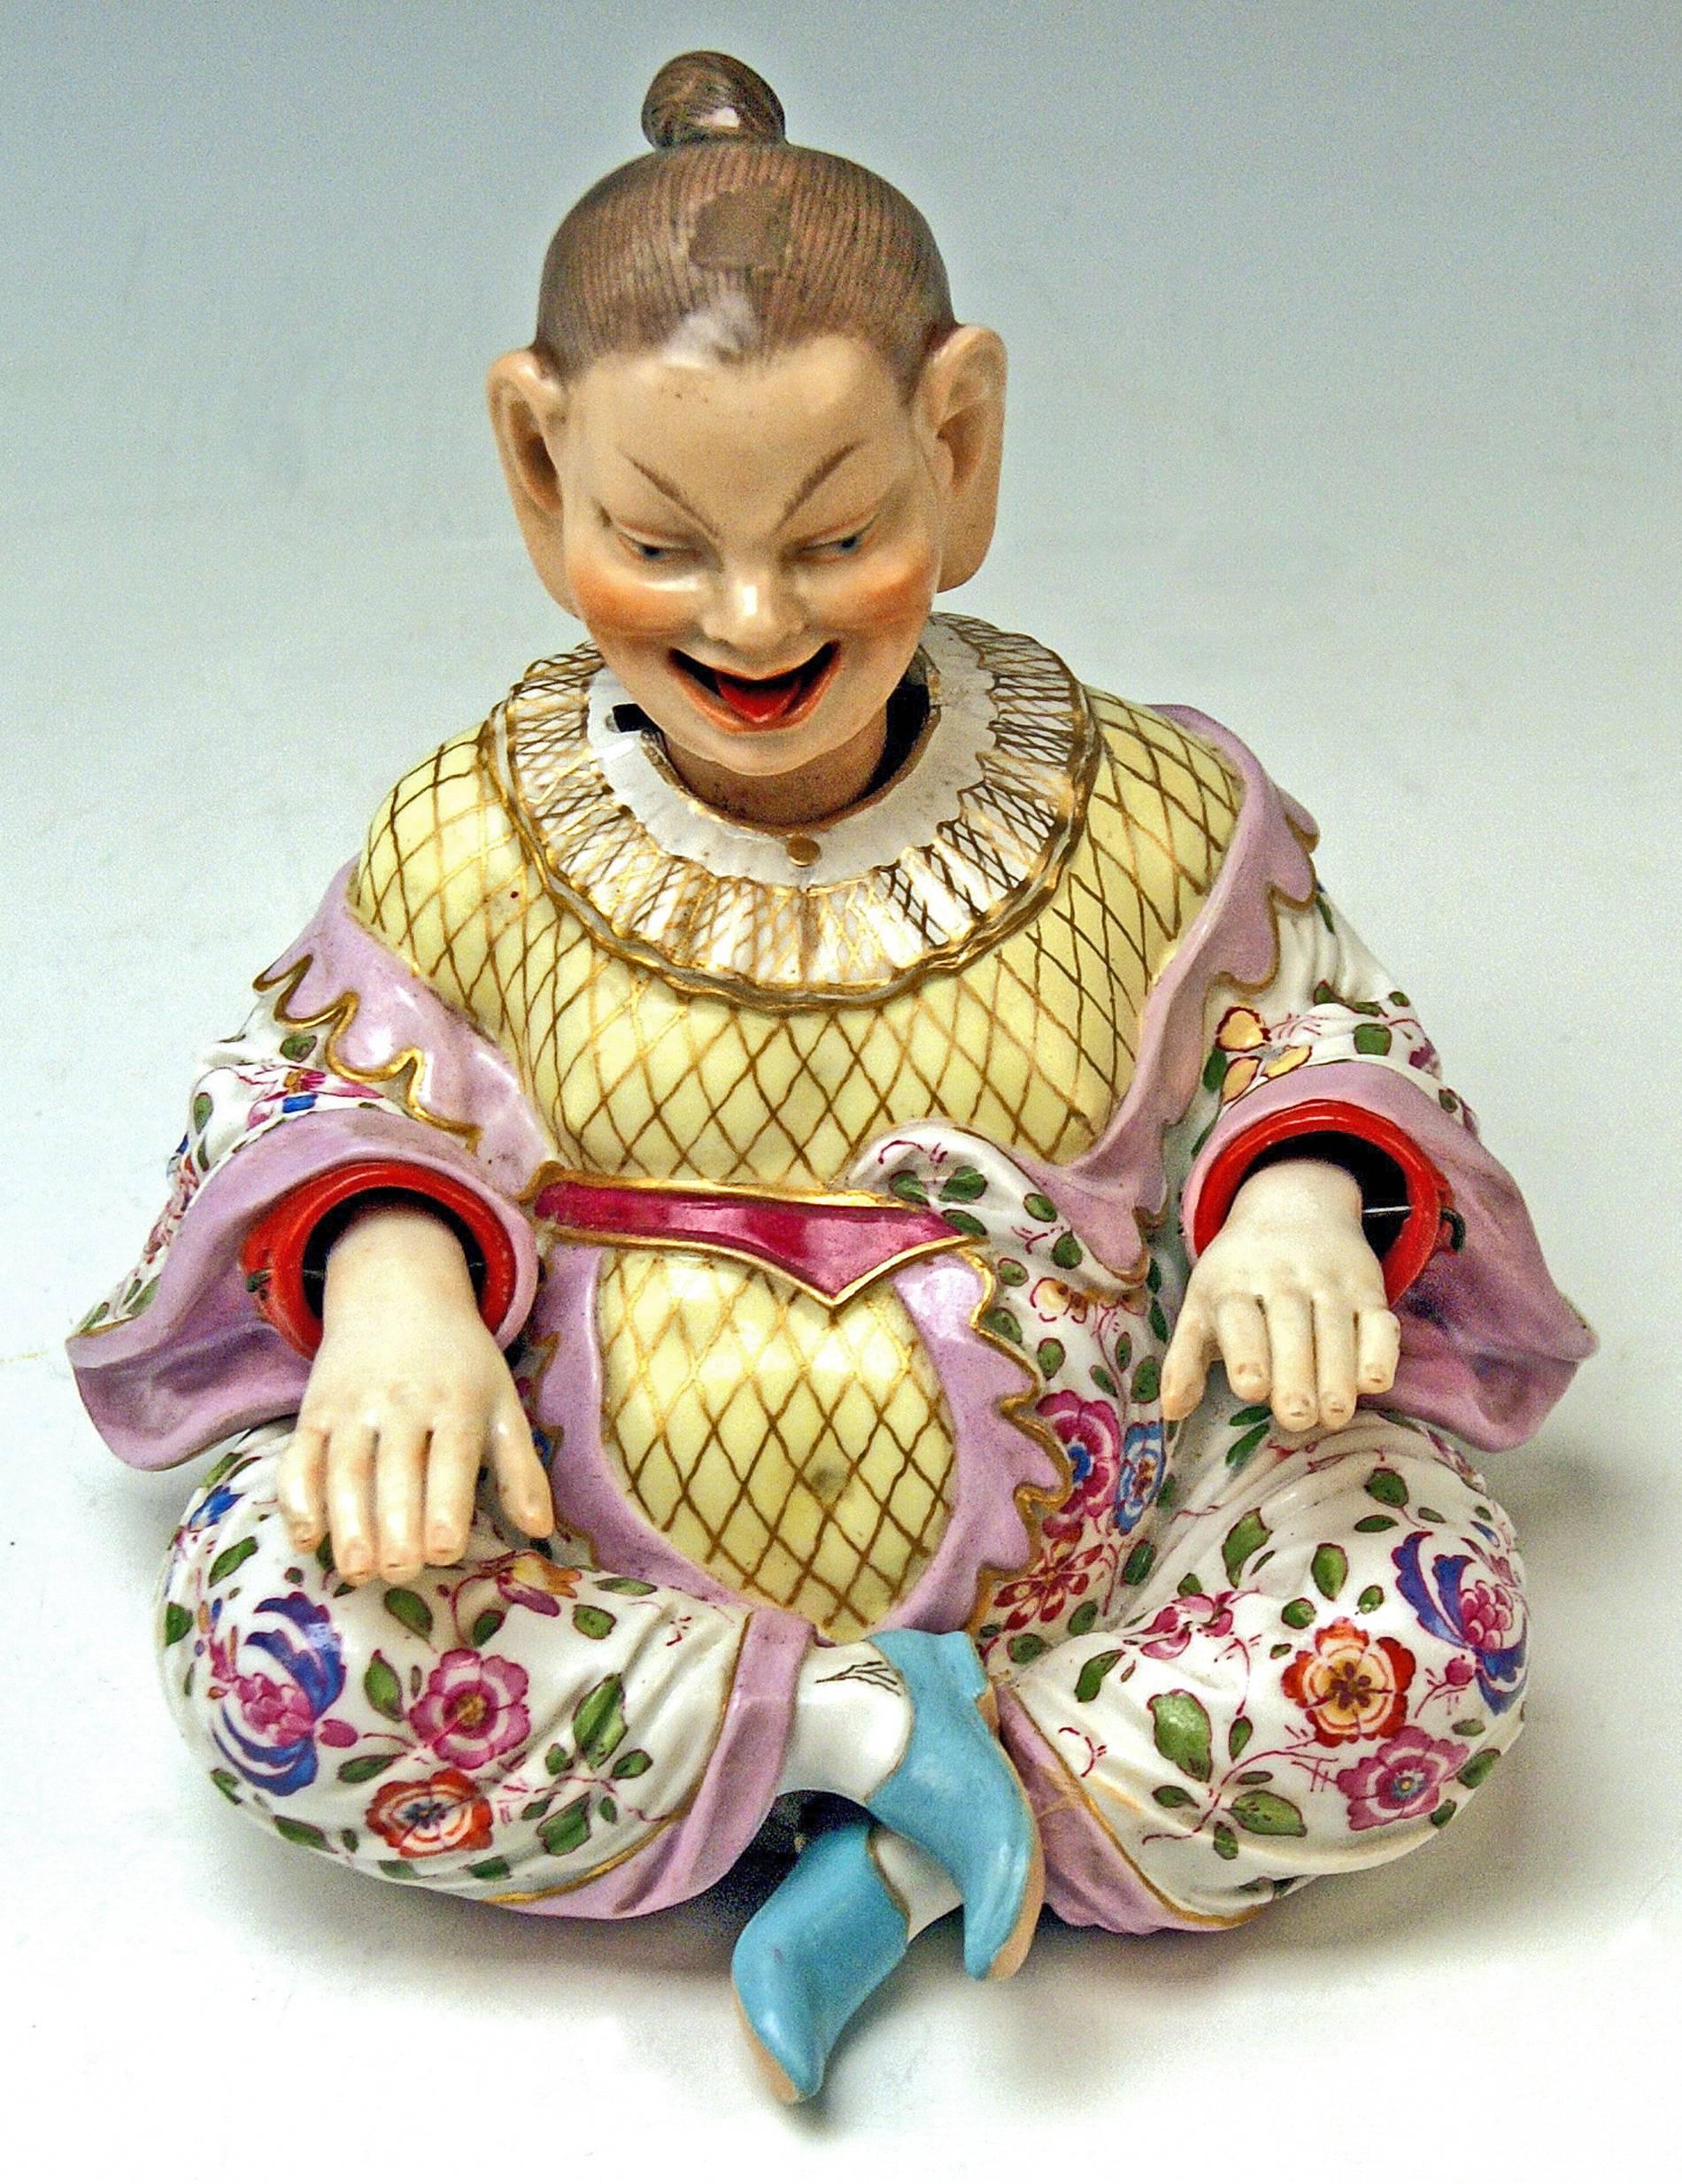 Meissen most remarkable figurine: Buddha
Attention: The Buddha figurine has movable hands, head and tongue.

Measures / dimensions:
height: 5.70 inches / 14.5 cm 
width: 5.90 inches / 15.0 cm 
depth: 5.90 inches / 15.0 cm 

Manufactory: